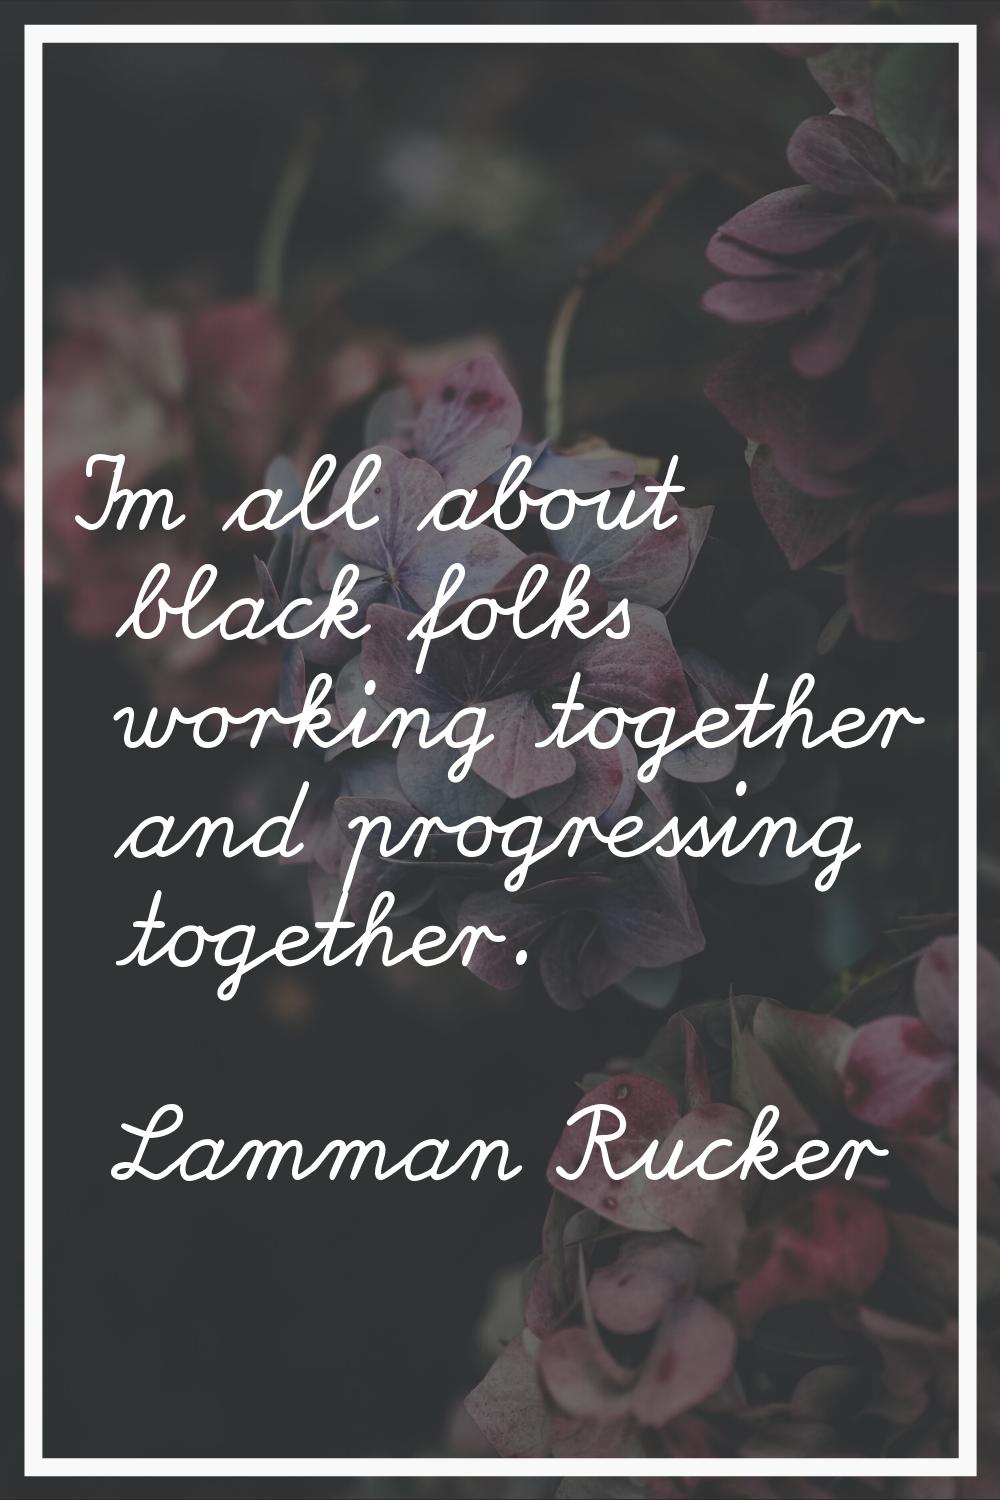 I'm all about black folks working together and progressing together.